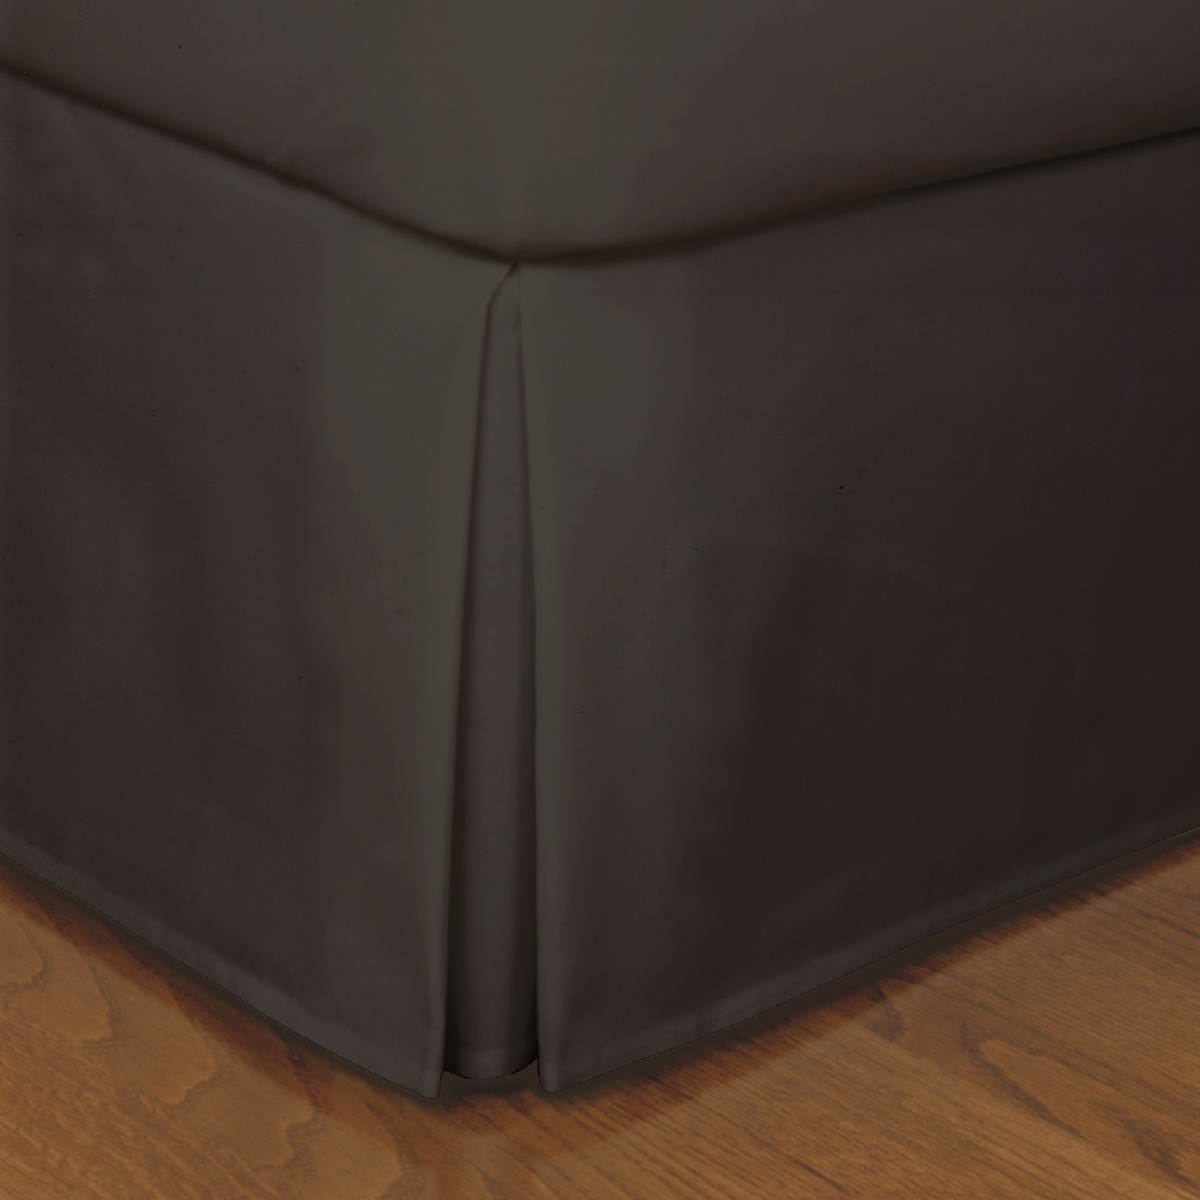 Fre23614blac04 14 In. Microfiber Bed Skirts Black - King